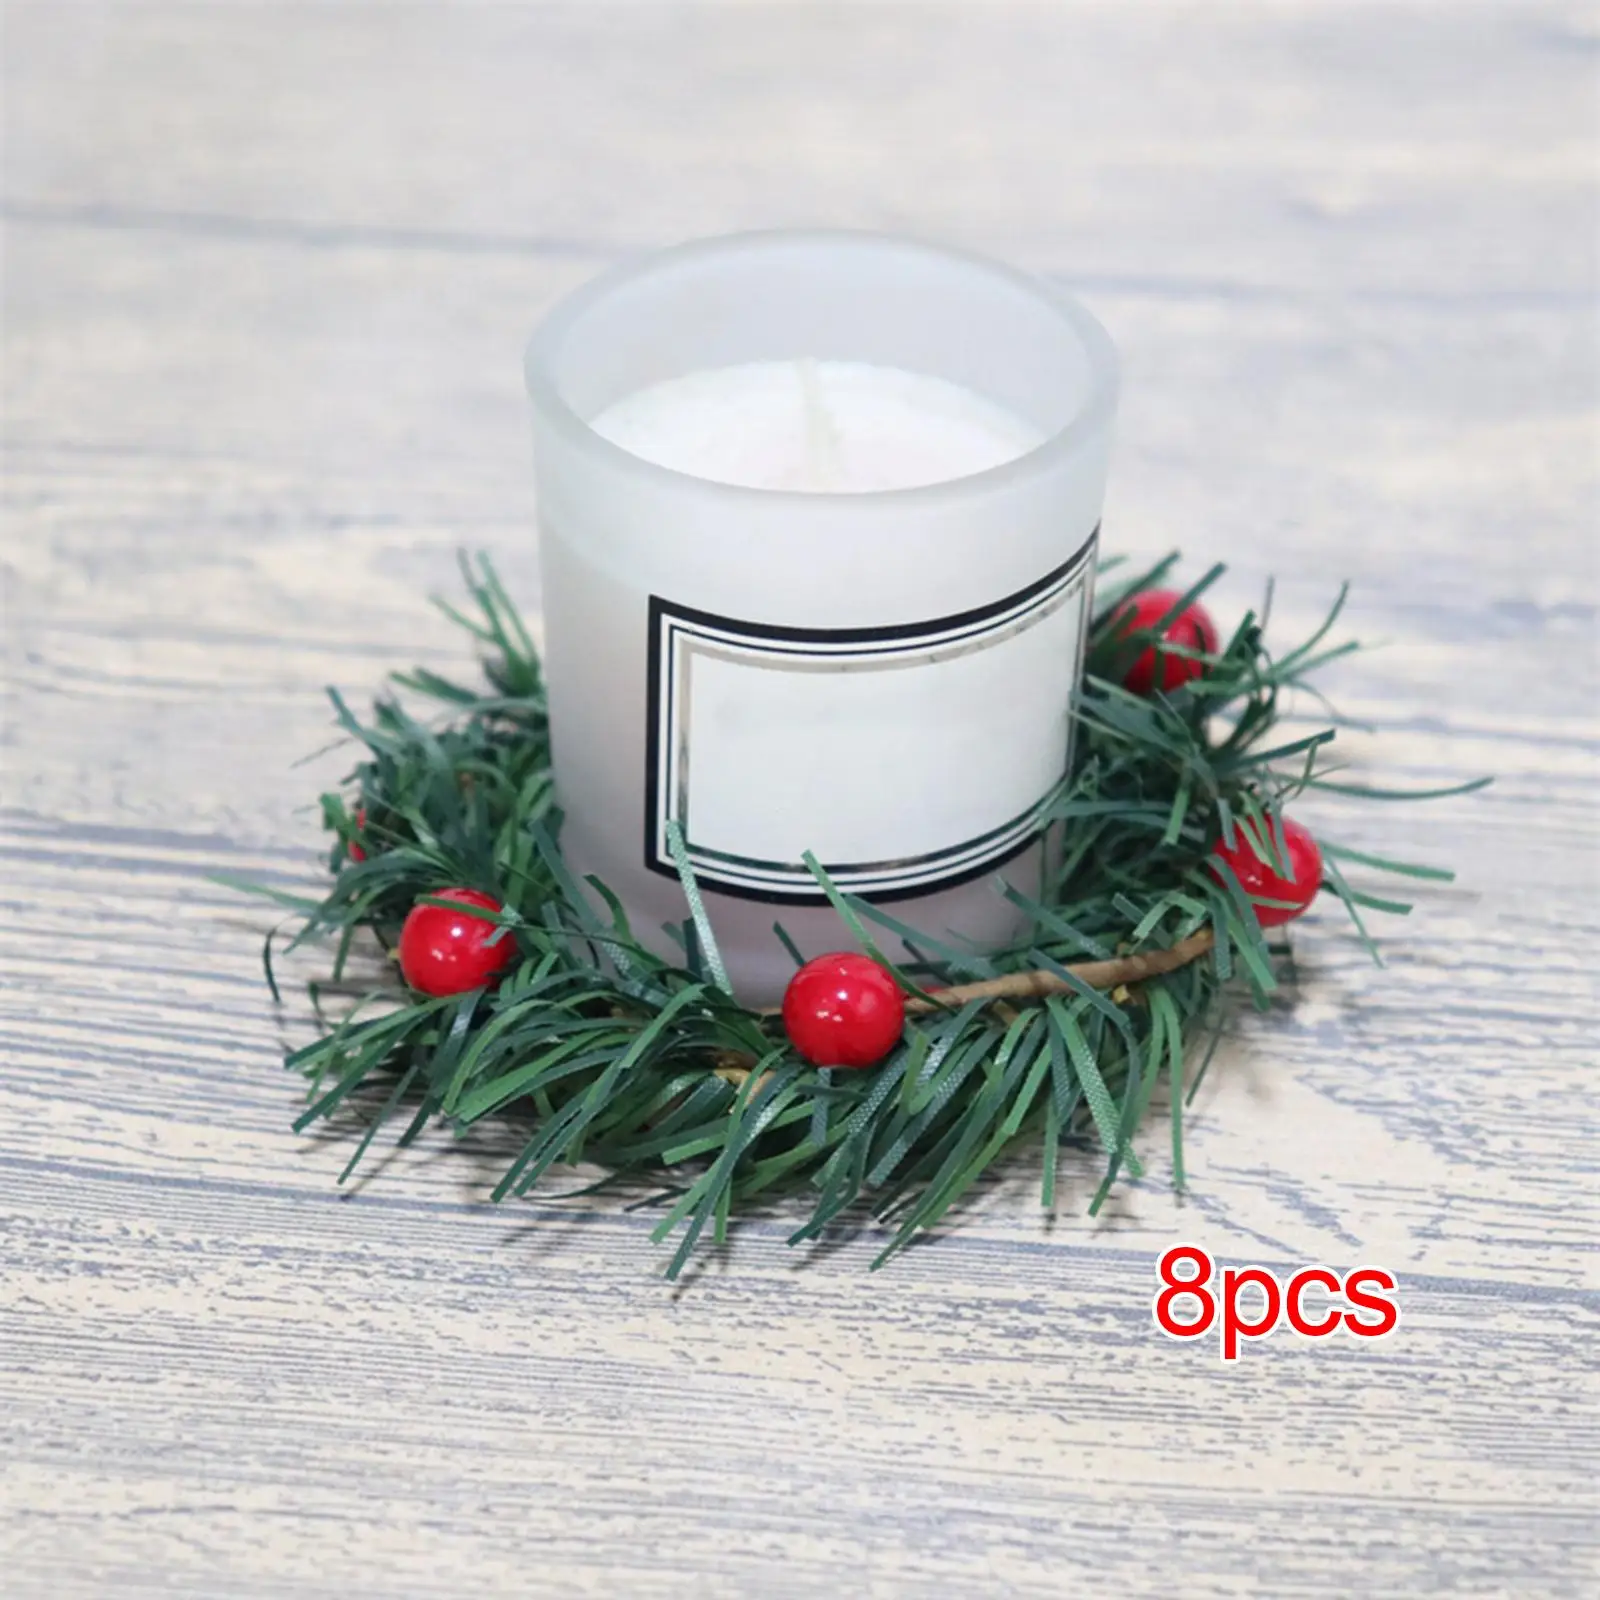 8 Pieces Pillar Candle Ring Wreath Floral Arrangement Pillar Candle Holder for Living Room Party Festival Table Thanksgiving